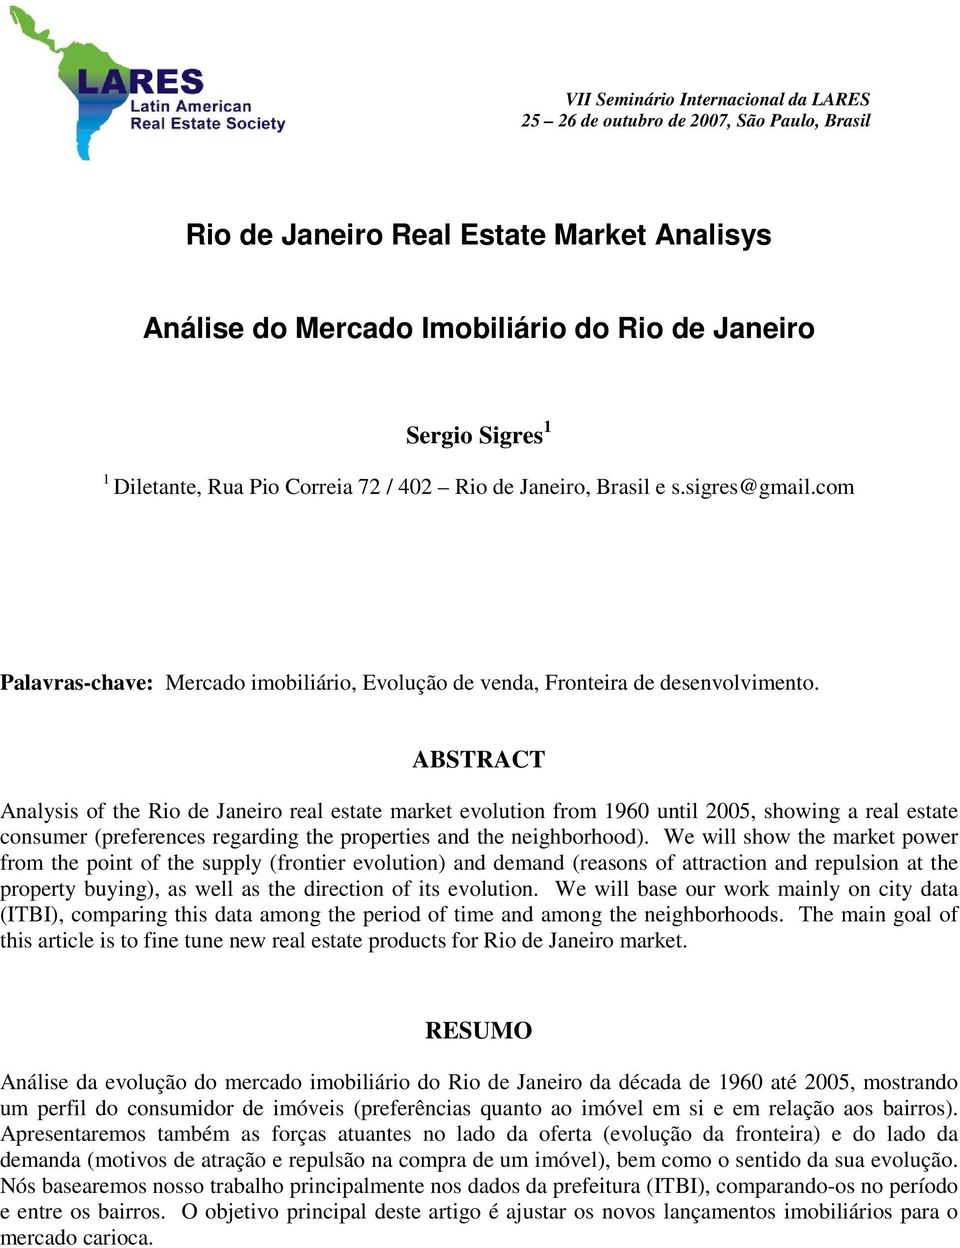 ABSTRACT Analysis of the Rio de Janeiro real estate market evolution from 1960 until 2005, showing a real estate consumer (preferences regarding the properties and the neighborhood).